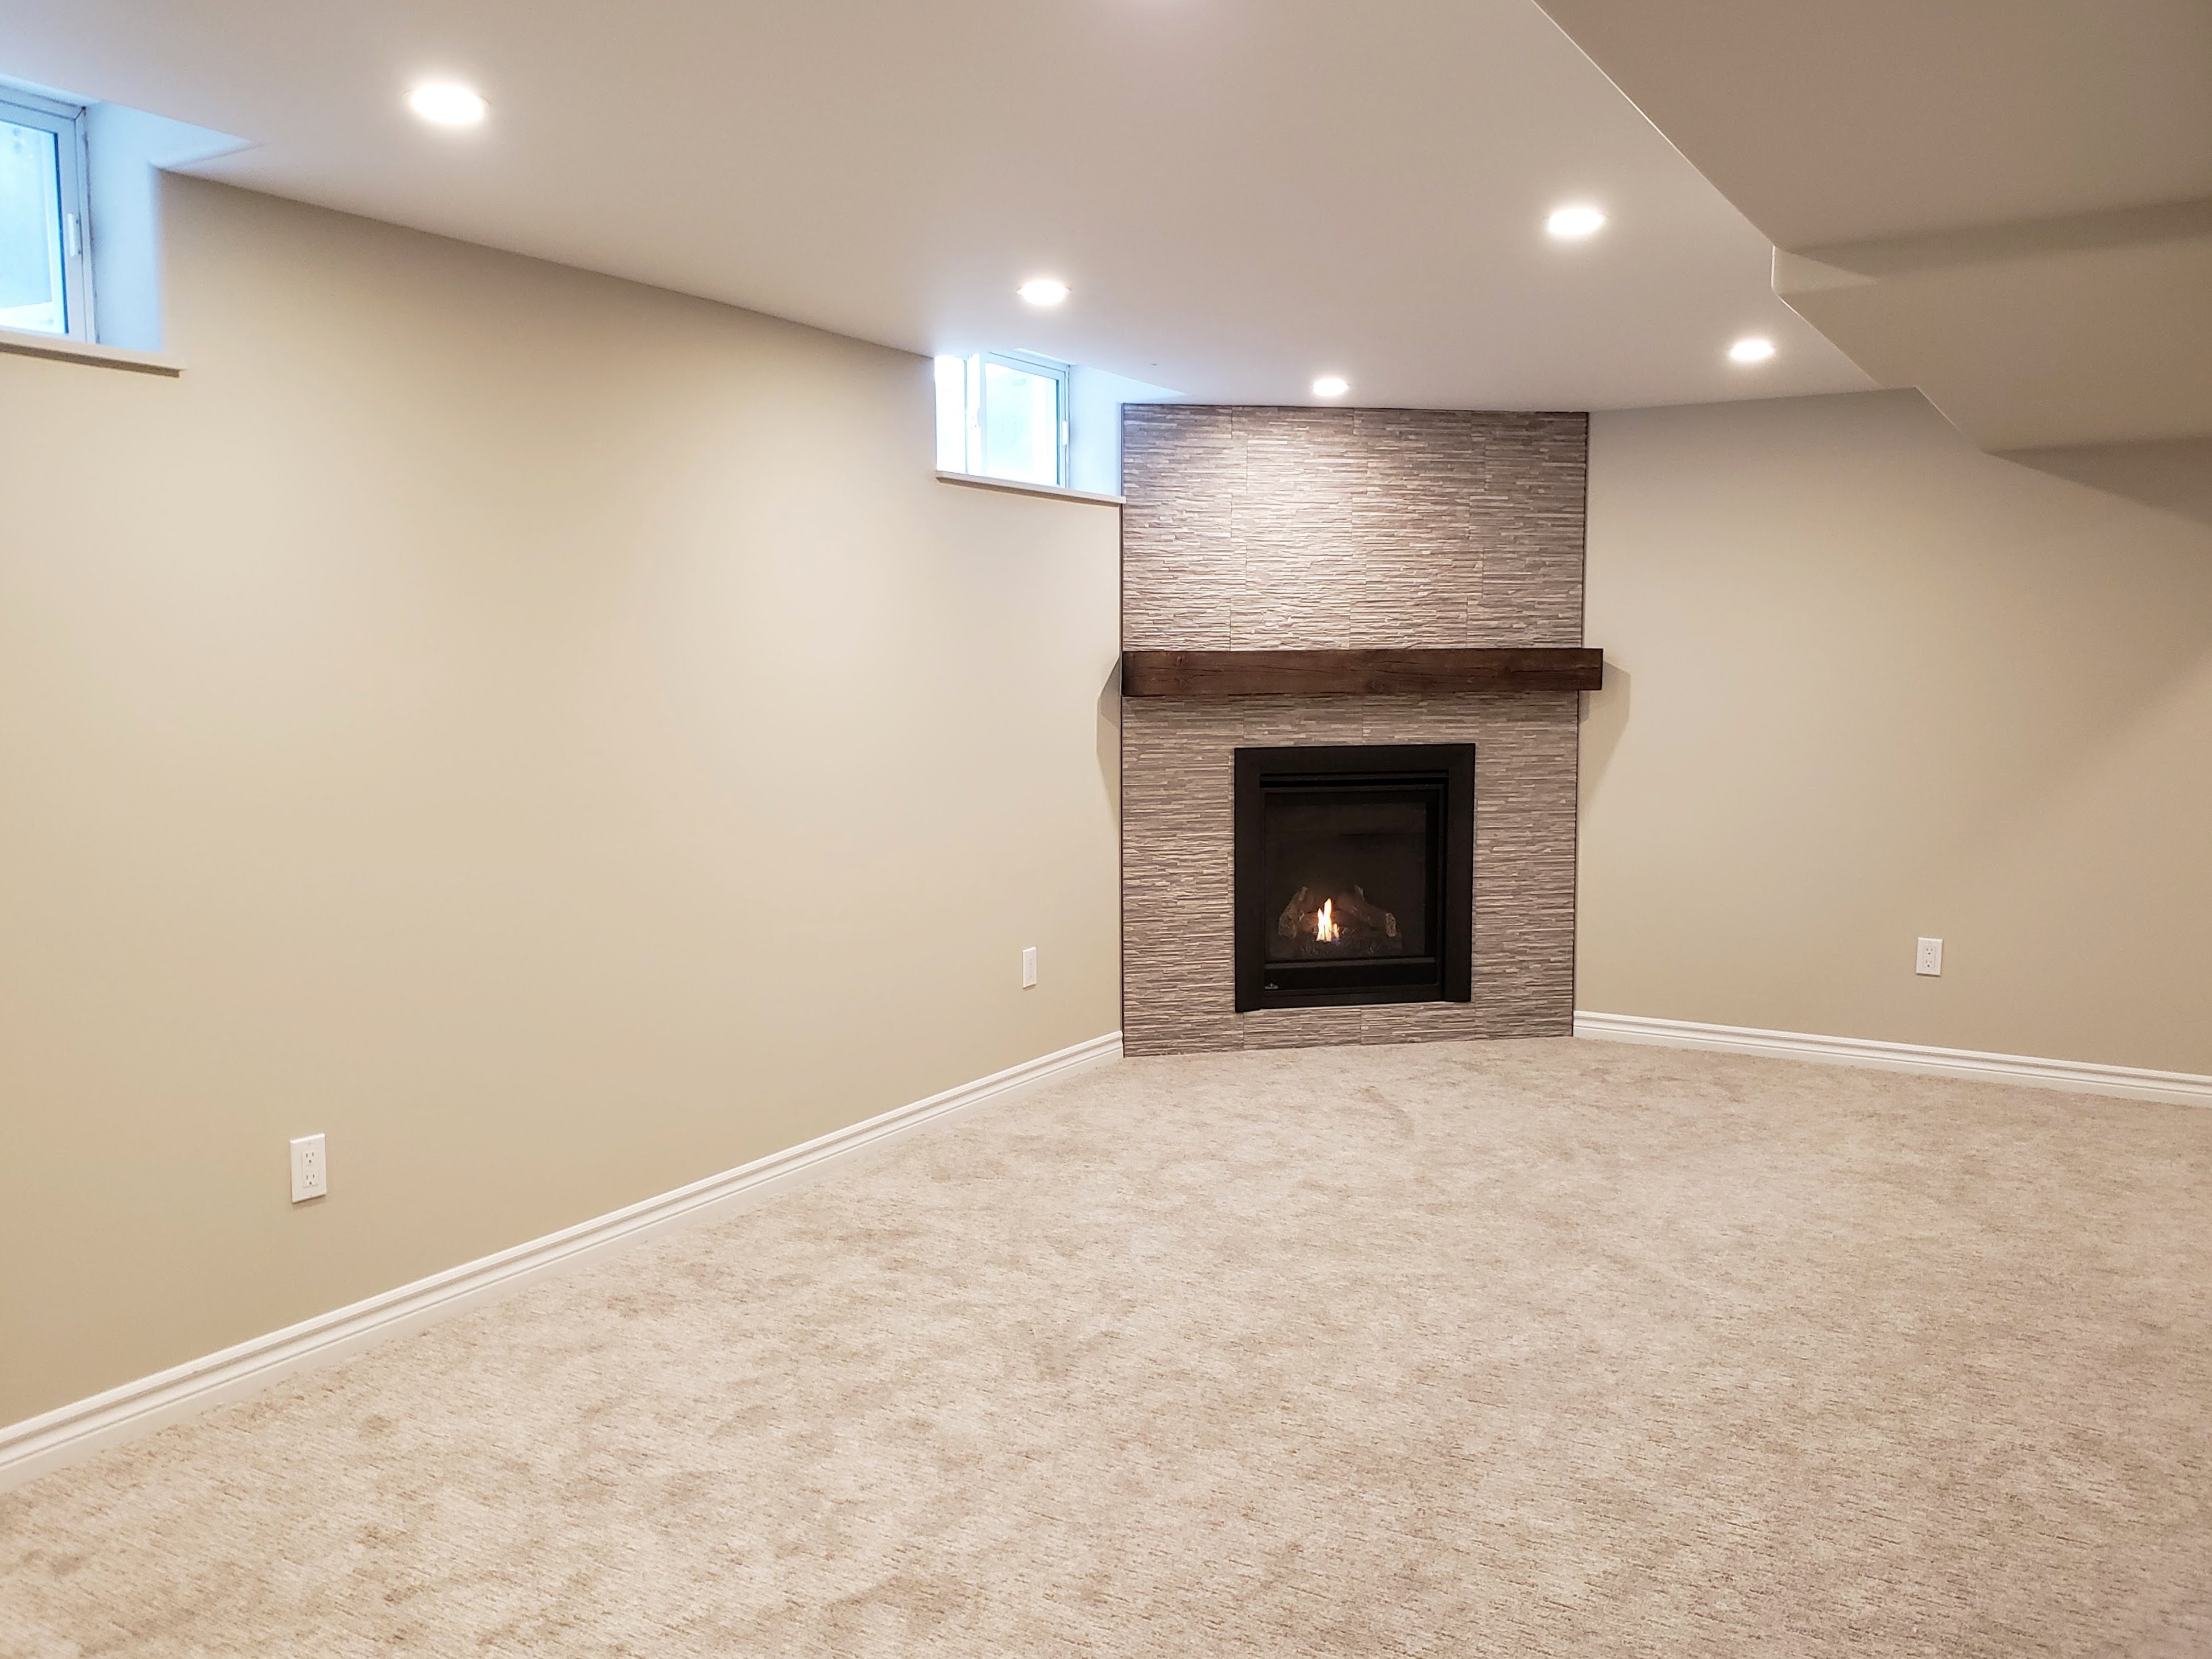 Look-out basement renovation by Germano Creative Interior Contracting Ltd.